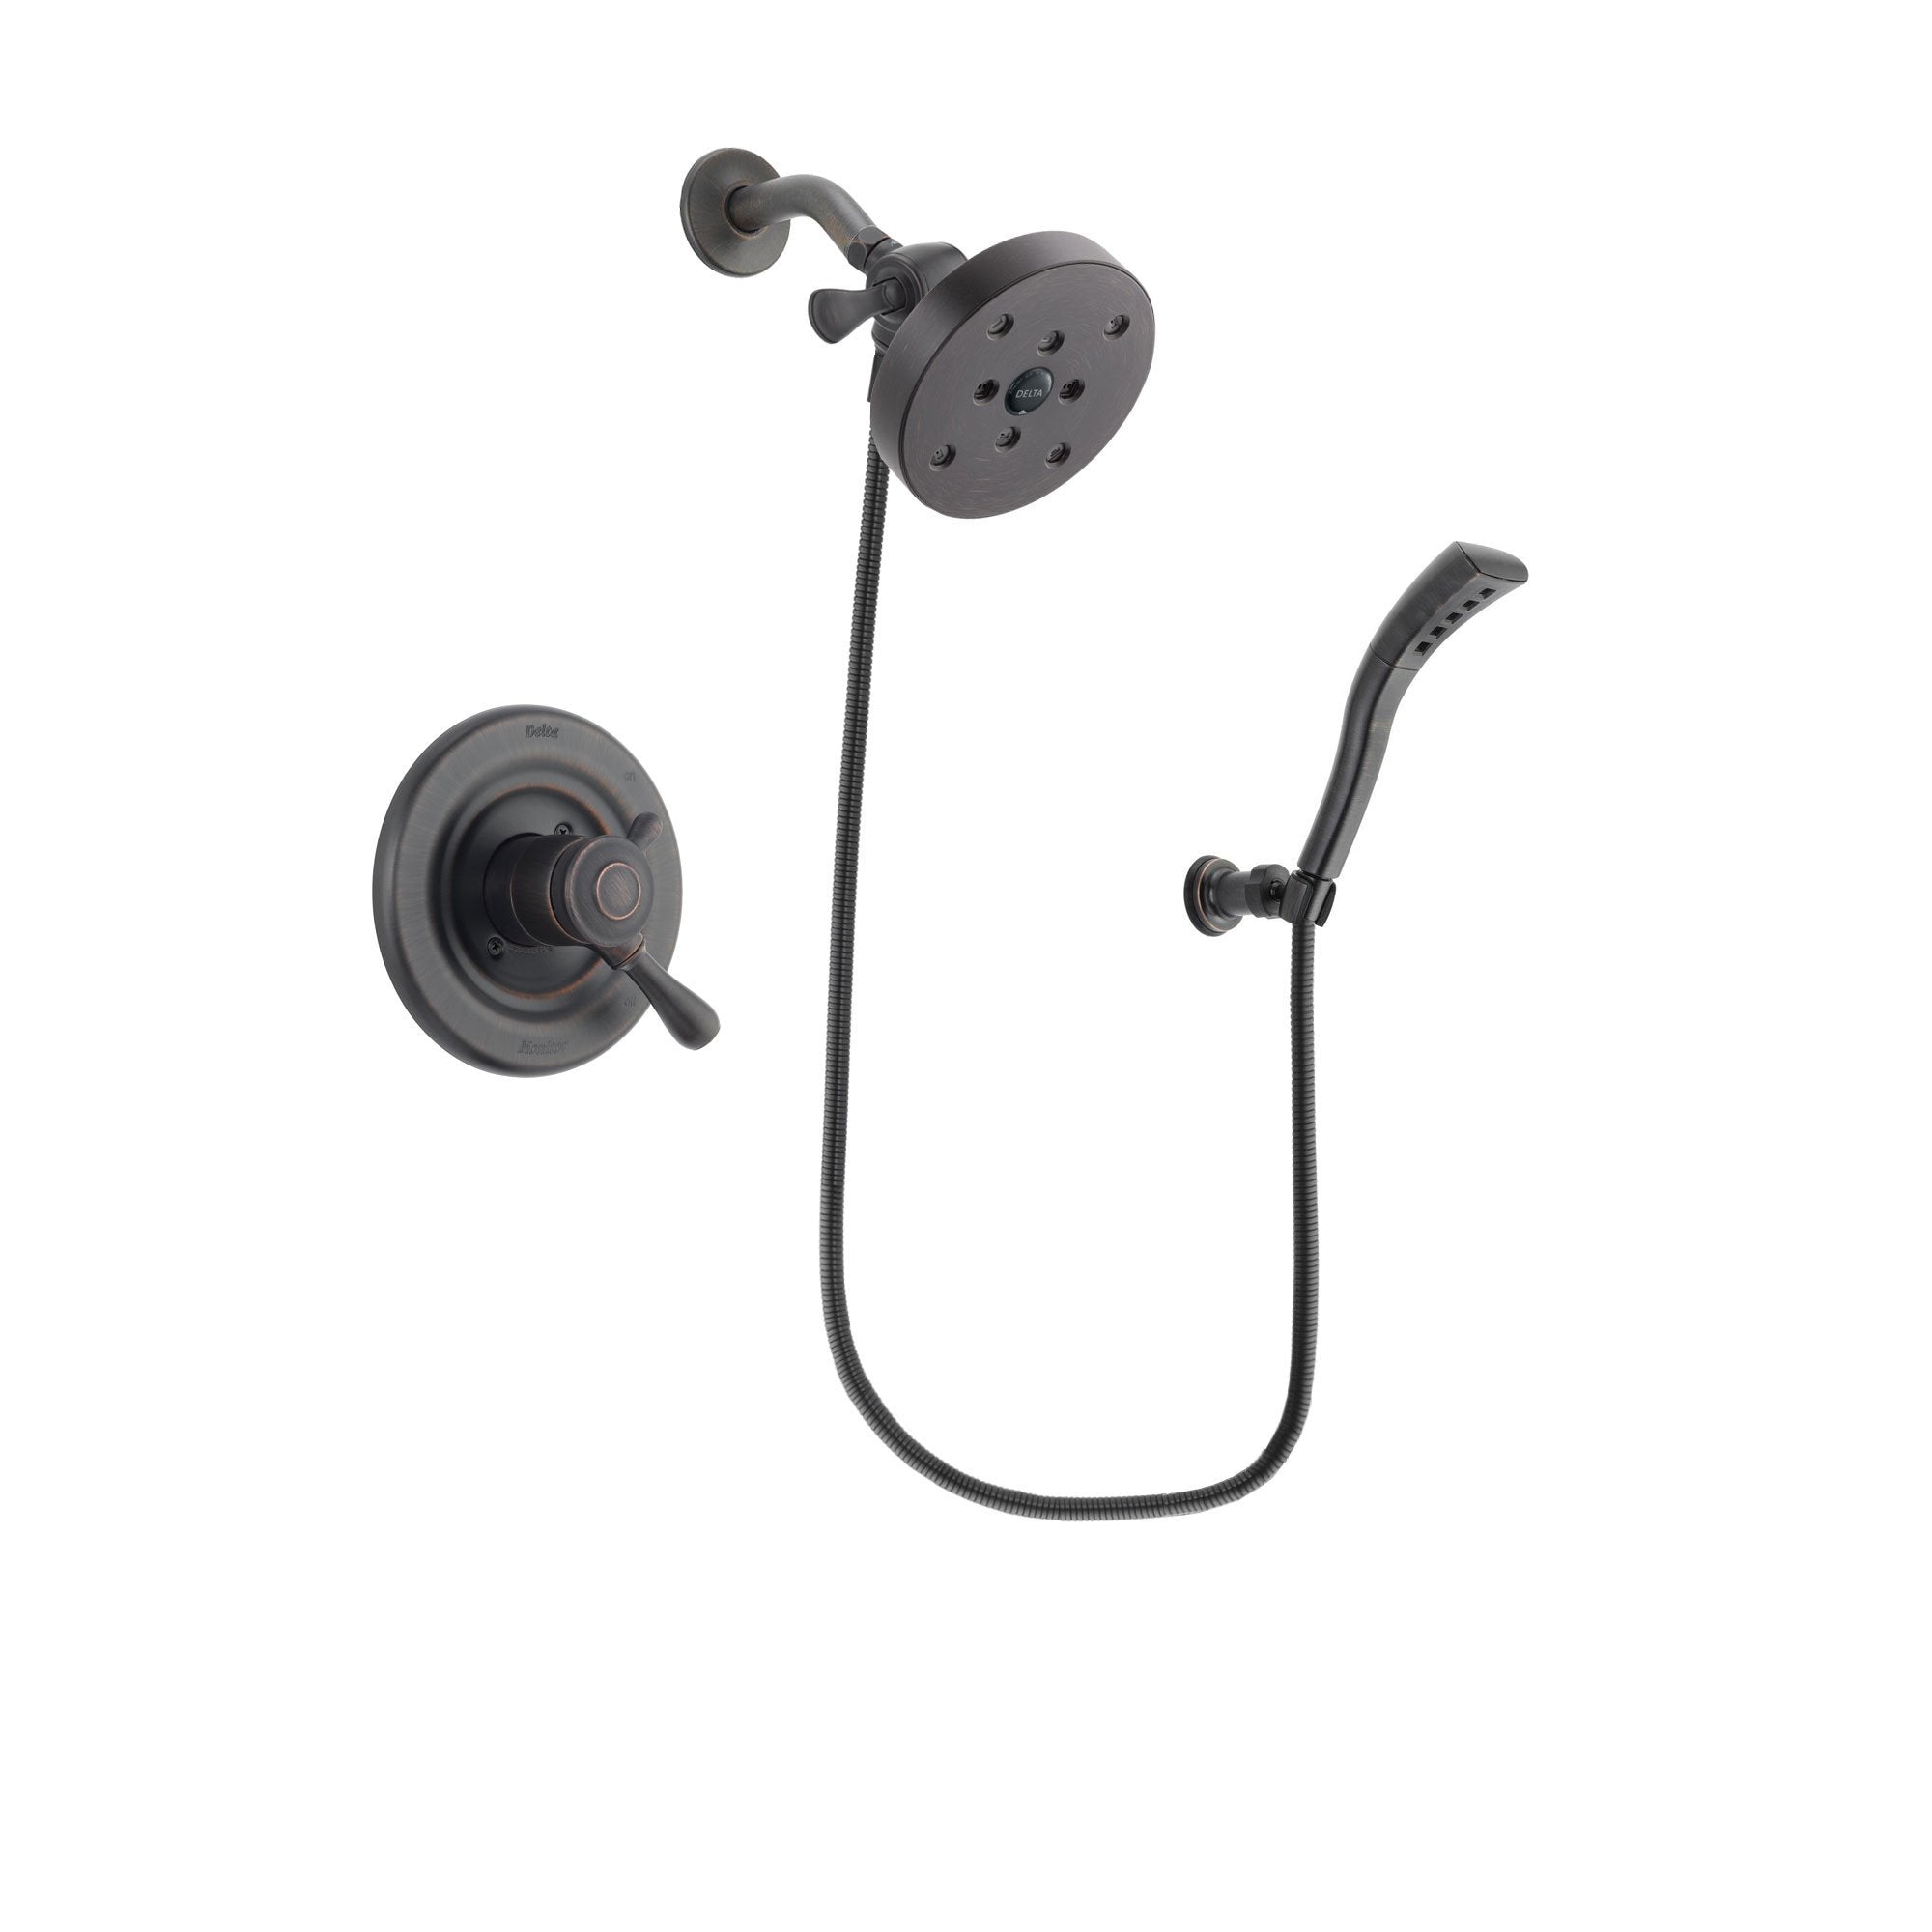 Delta Leland Venetian Bronze Finish Dual Control Shower Faucet System Package with 5-1/2 inch Showerhead and Modern Wall Mount Personal Handheld Shower Spray Includes Rough-in Valve DSP2974V